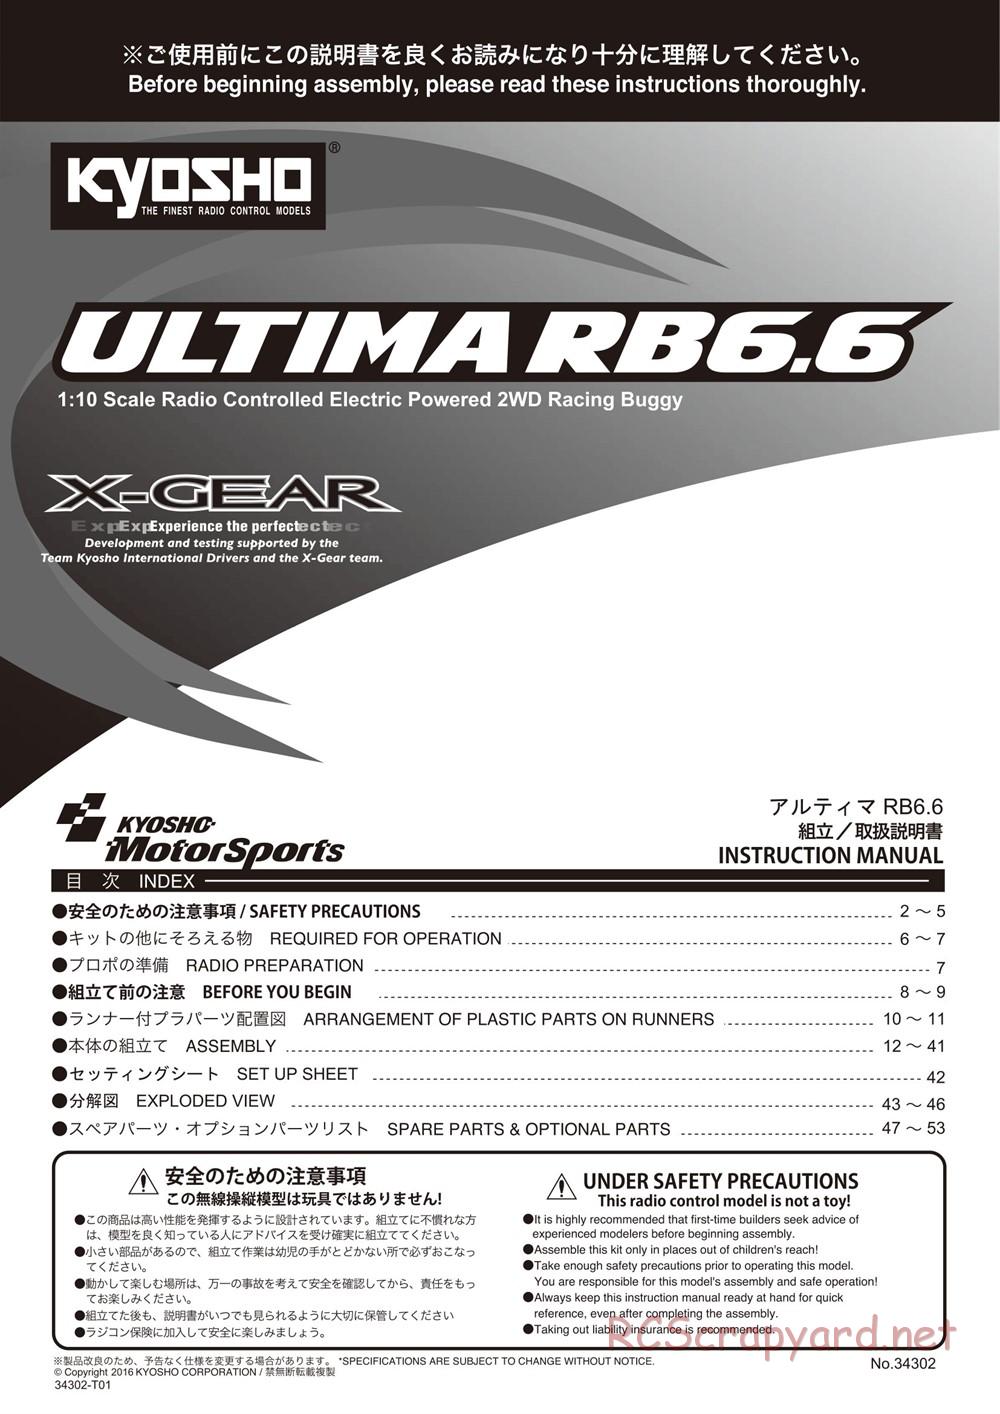 Kyosho - Ultima RB6.6 - Manual - Page 1